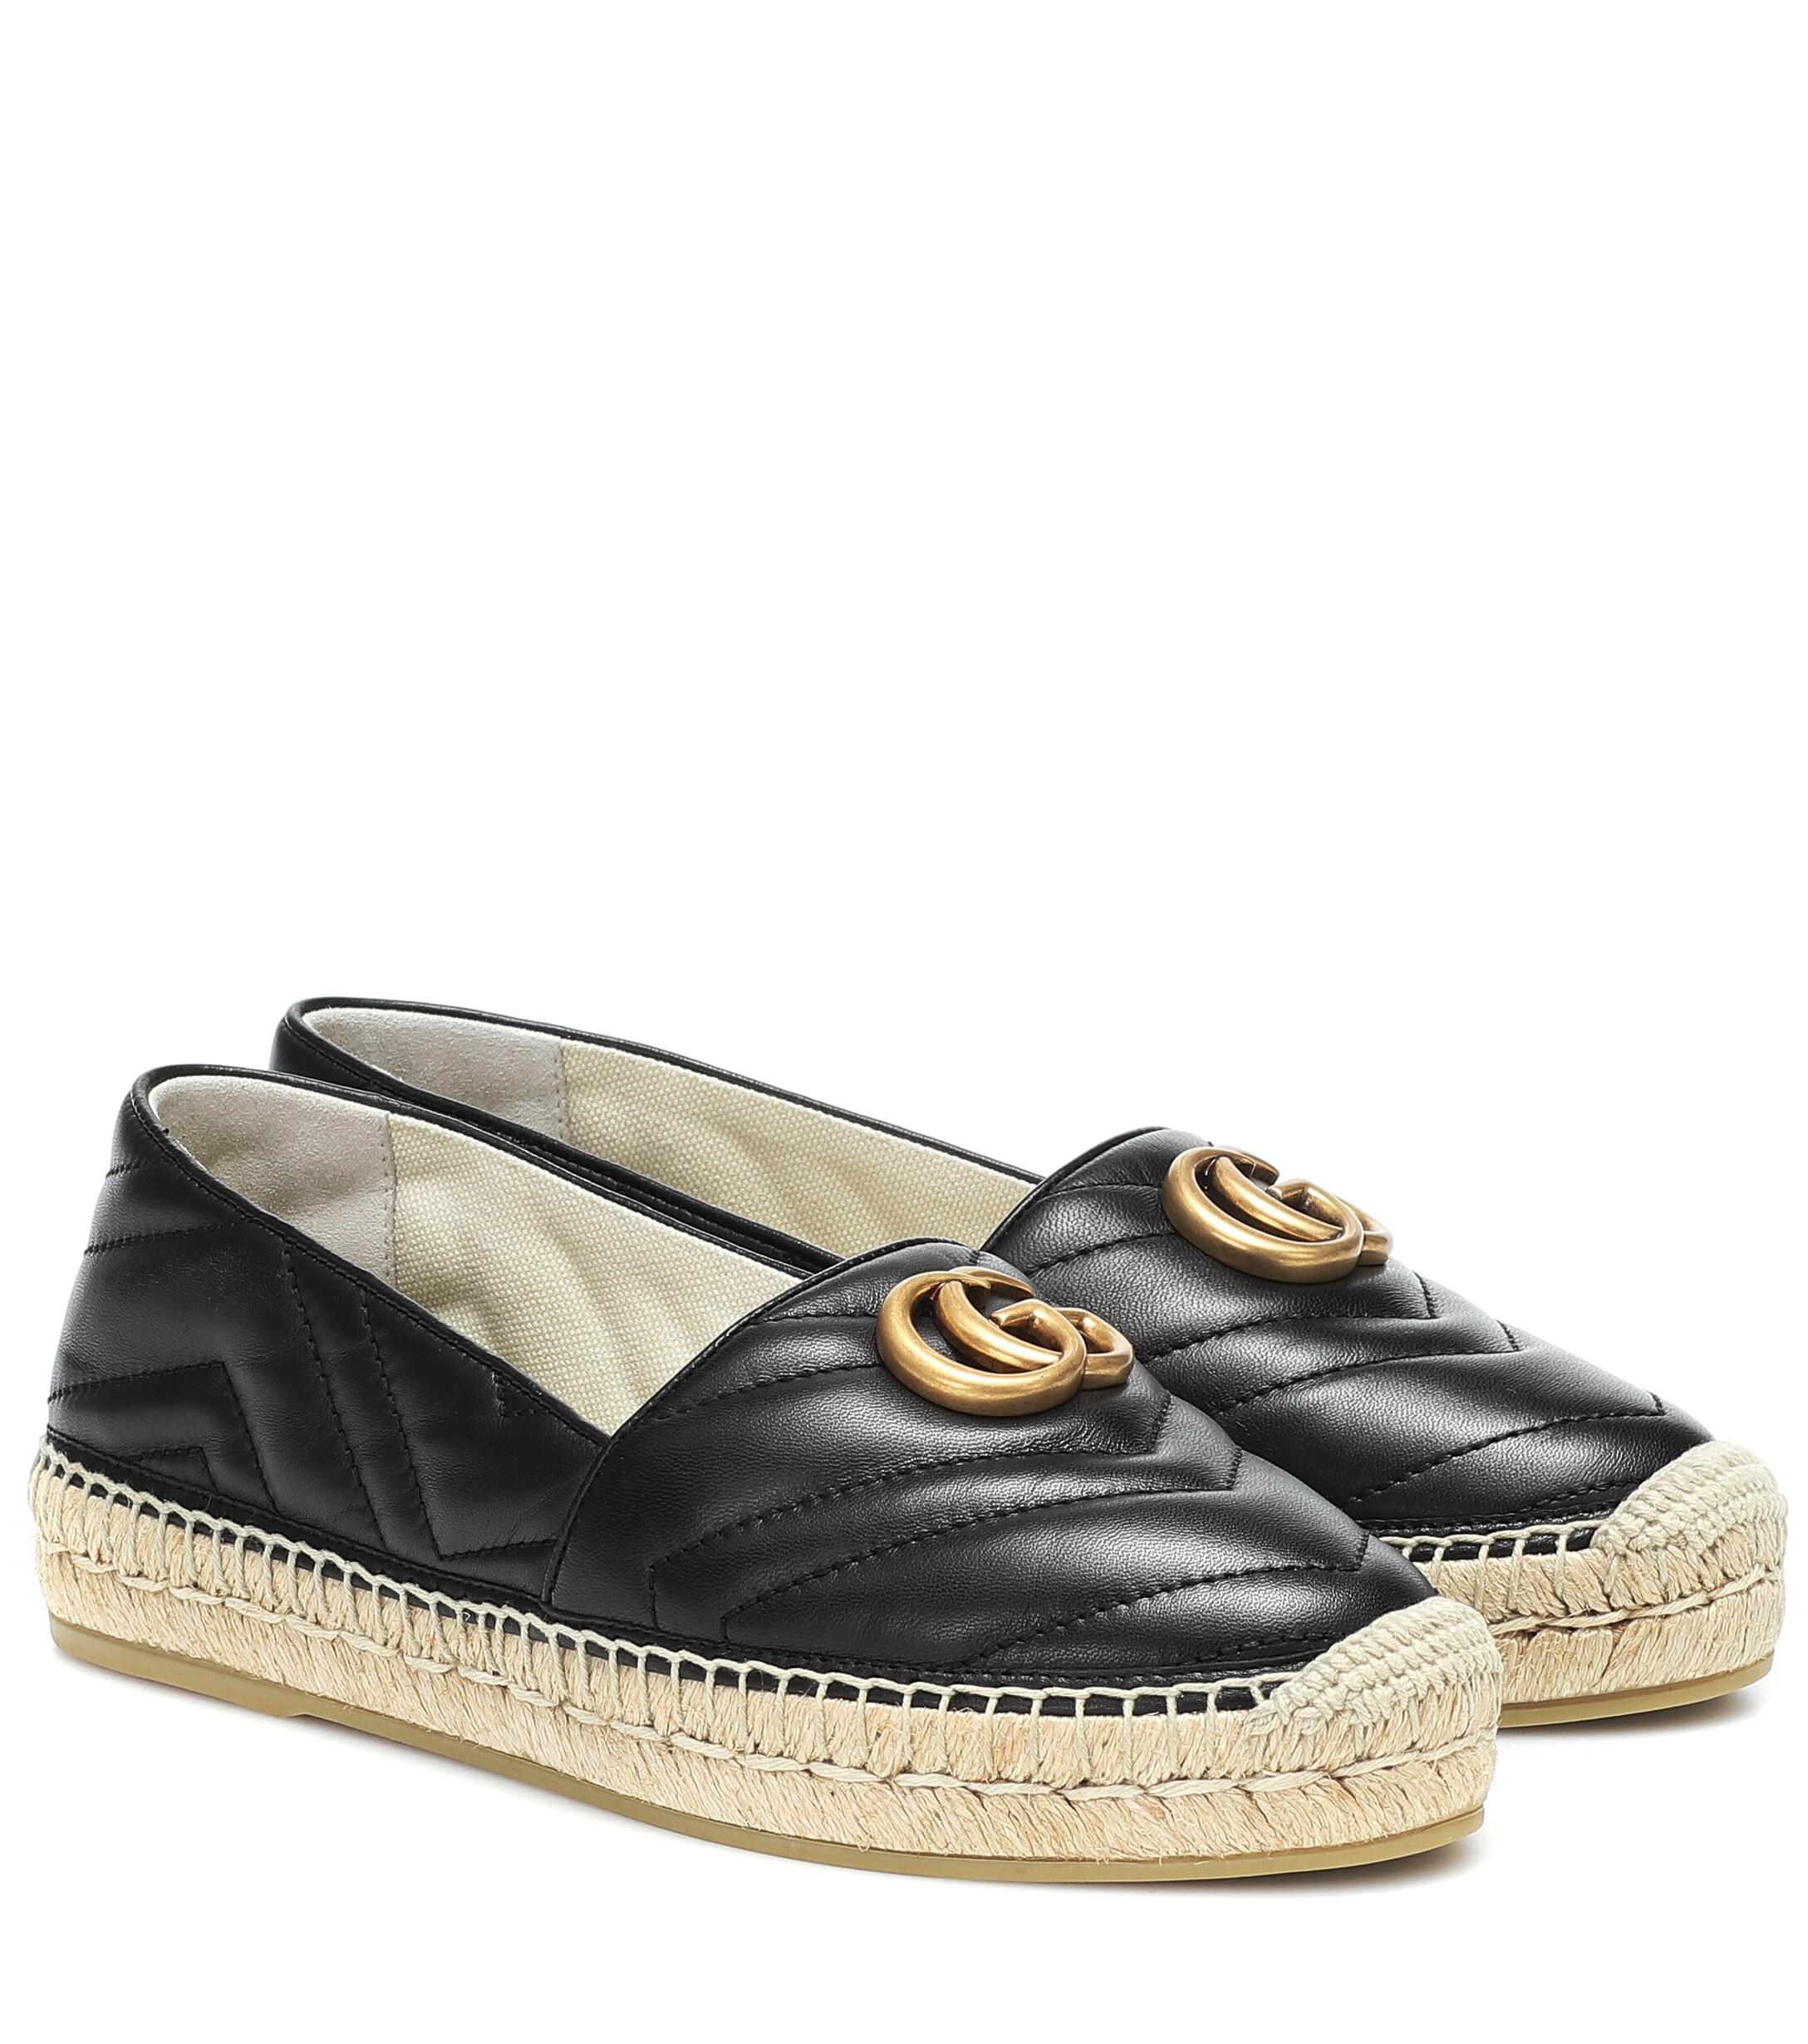 Gucci Double G Leather Espadrilles in Black - Lyst